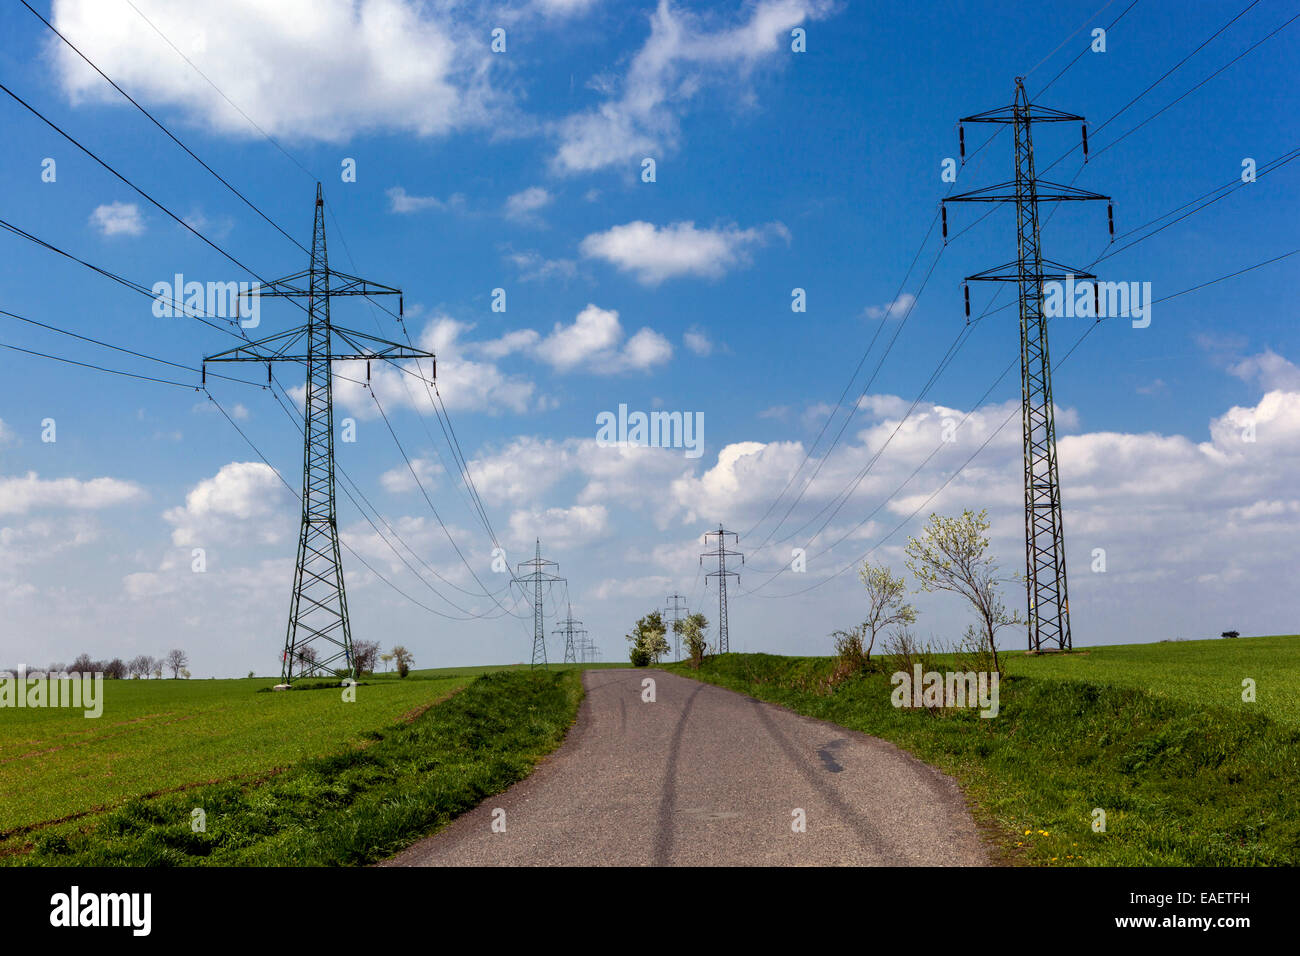 Transmission, power lines in a field, clouds Stock Photo